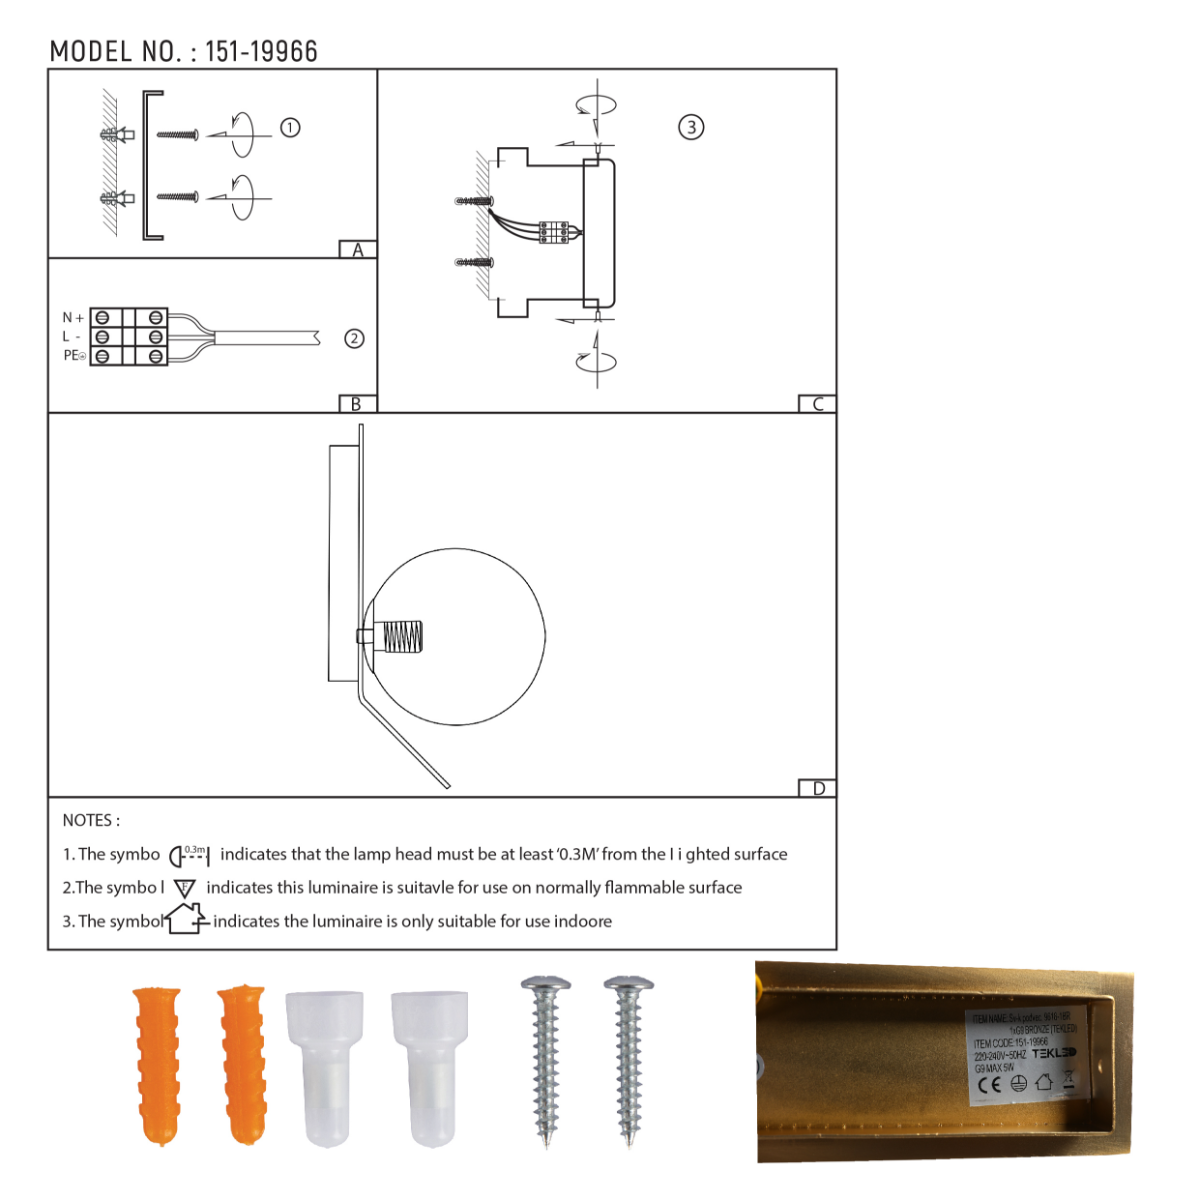 Technical specs of Contemporary Adjustable Globe Wall Sconce Light 151-19966